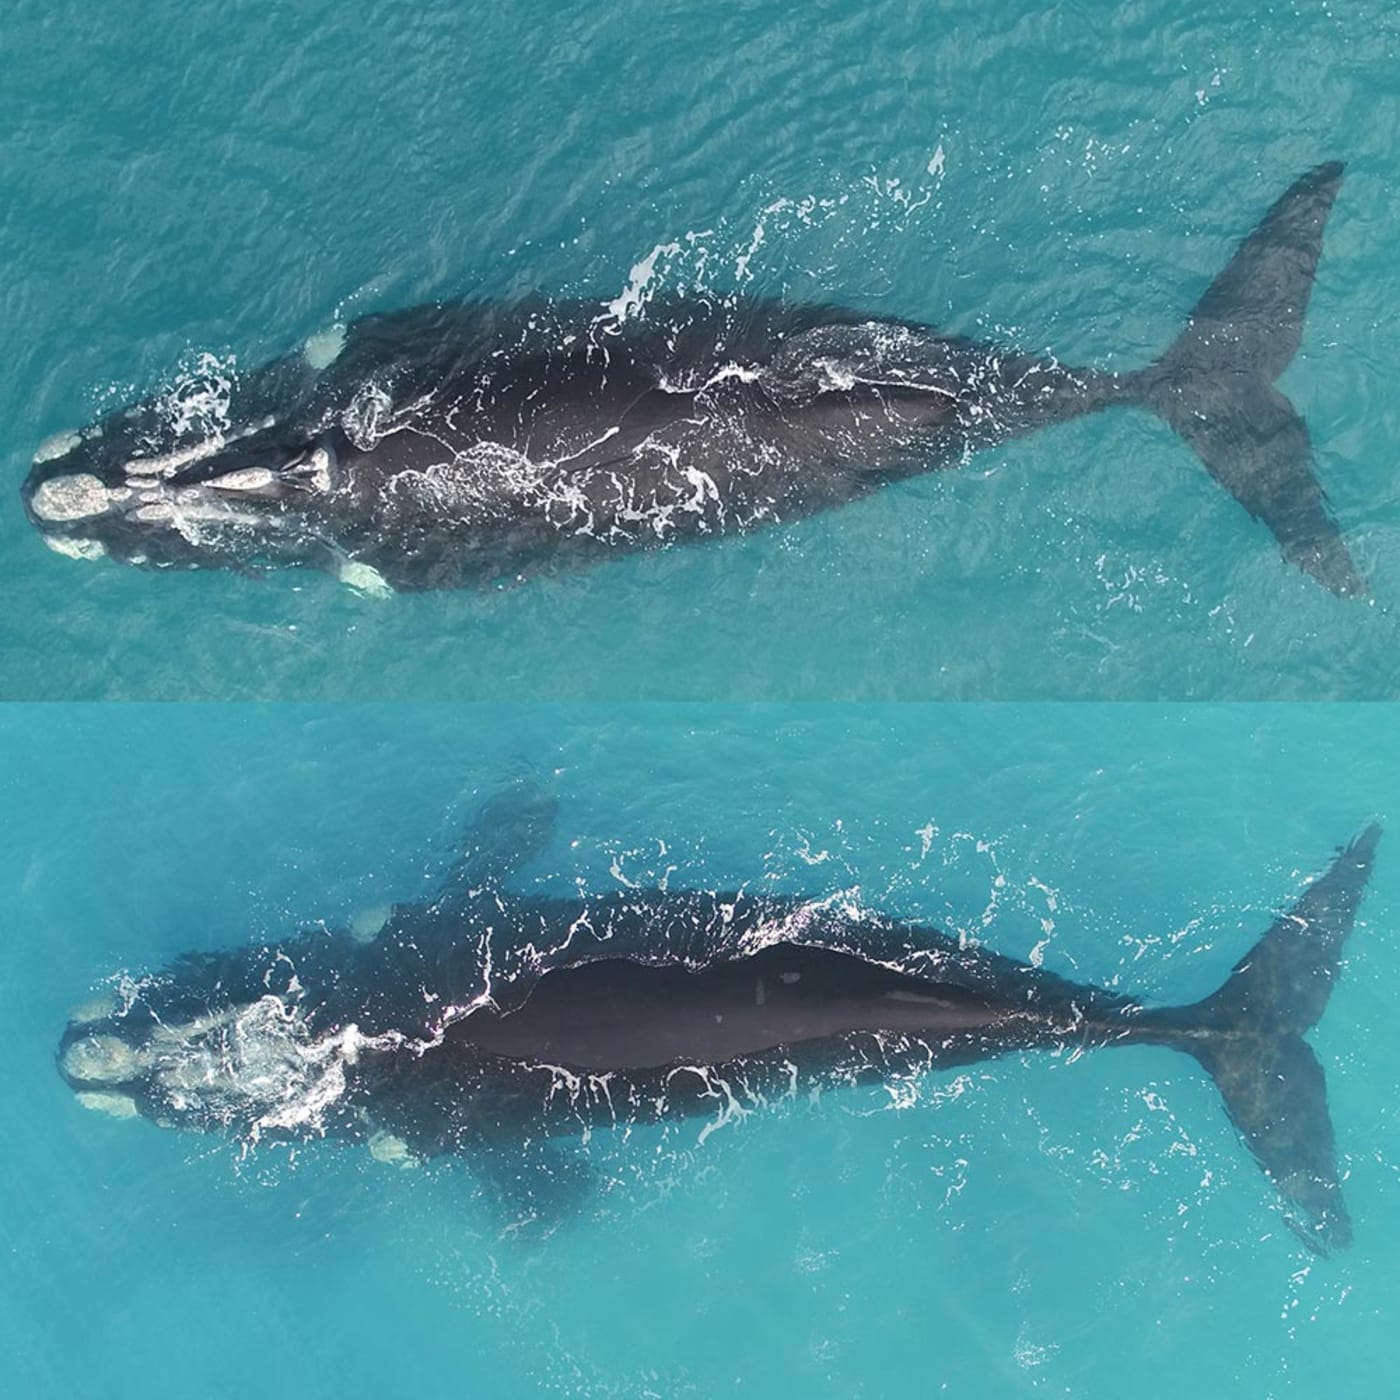 Southern right whale Bella (composite image)